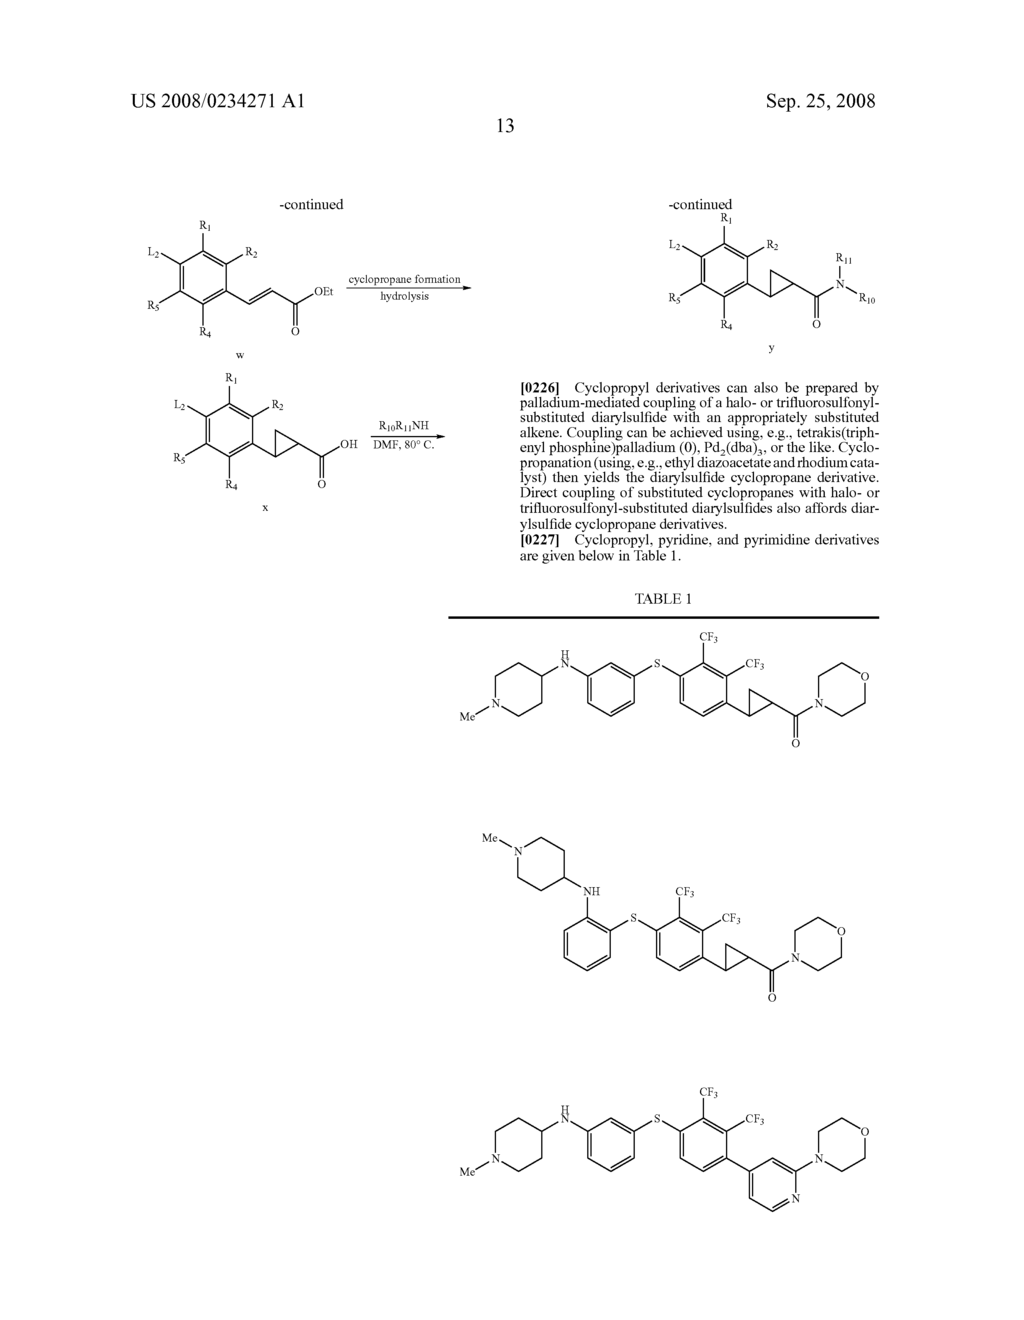 Arylphenylamino- and Arylphenylether-Sulfide Derivatives, Useful For the Treatment of Inflammatory and Immune Diseases, and Pharmaceutical Compositions Containing Them - diagram, schematic, and image 14